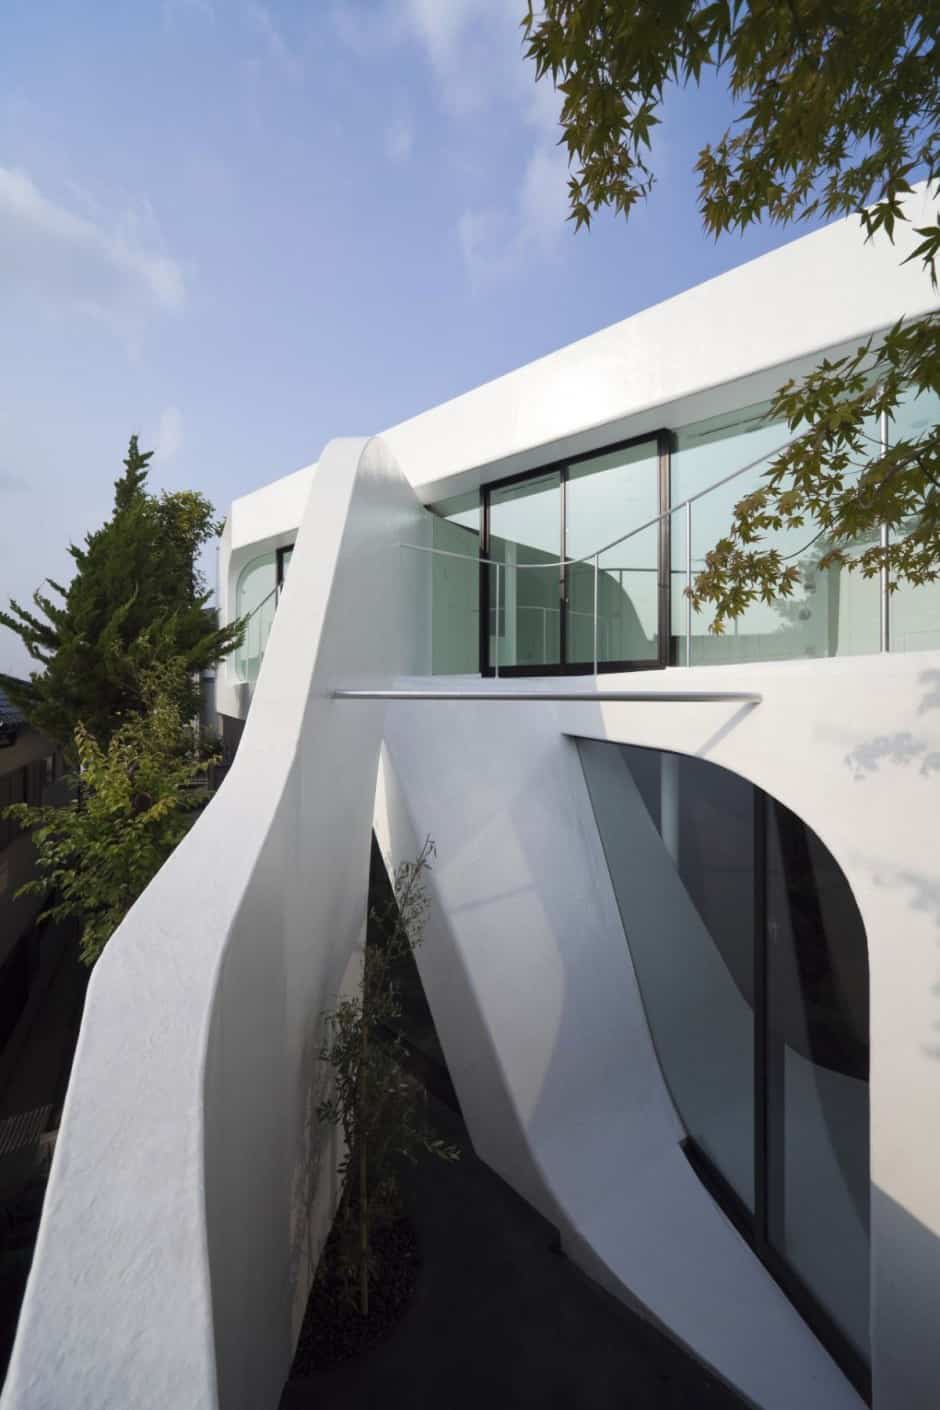 futuristic-curved-wall-house-integrates-nature-and-architecture-3.jpg